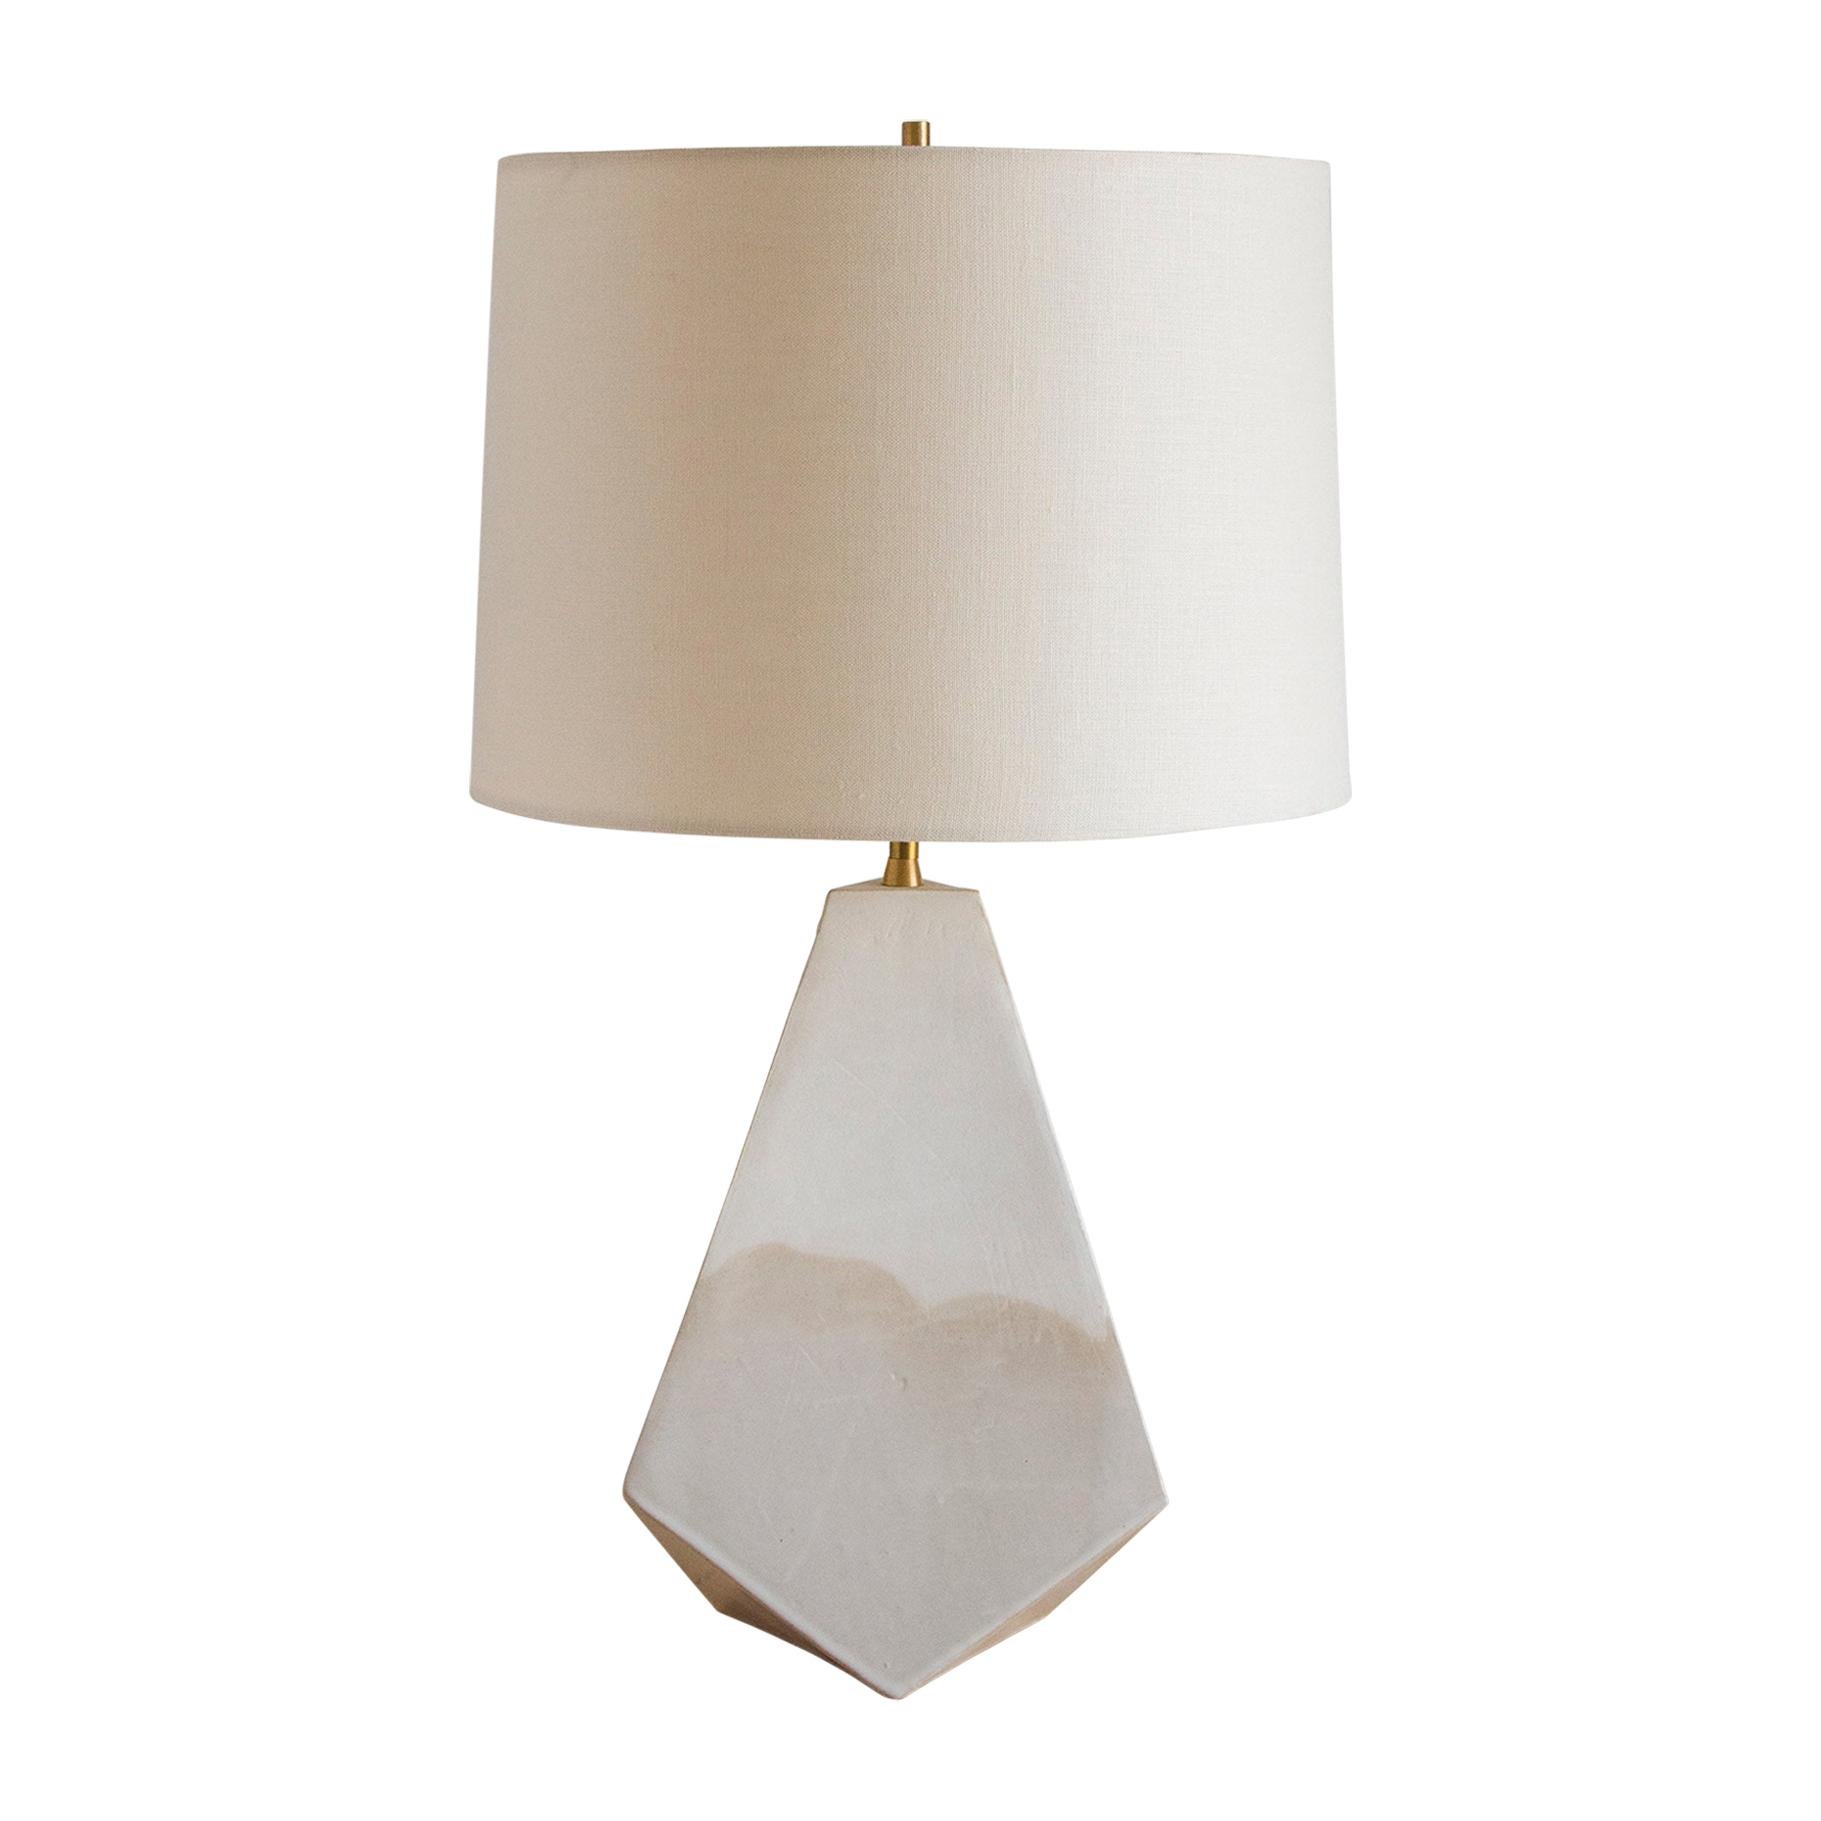 'Mountain' Matte and Glossy White Geometric Ceramic Table Lamp